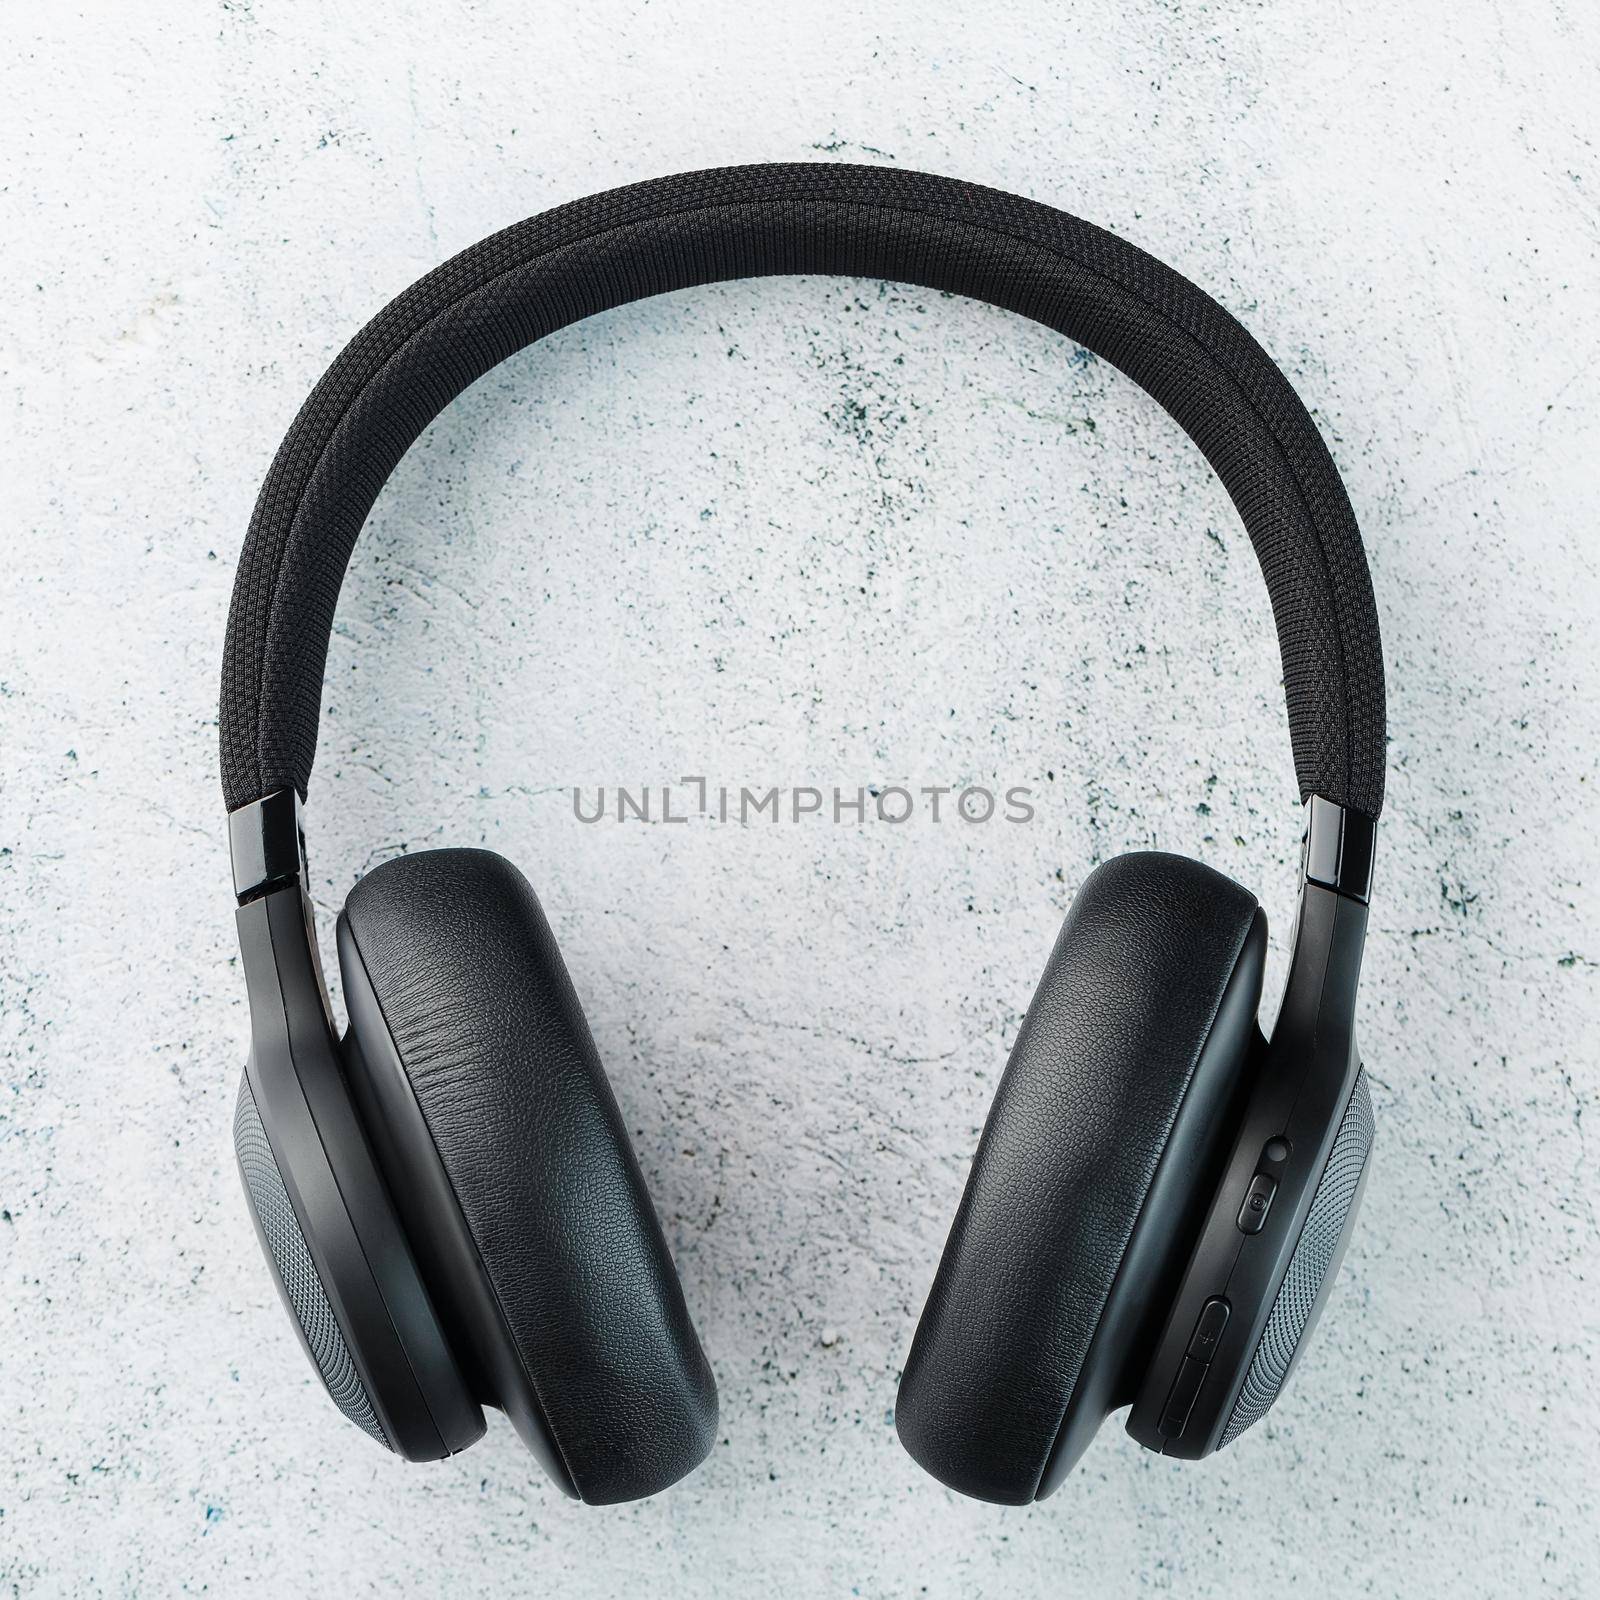 Wireless Black Headphones on a gray stone background. View from above. In-ear headphones for playing games and listening to music tracks by AlexGrec